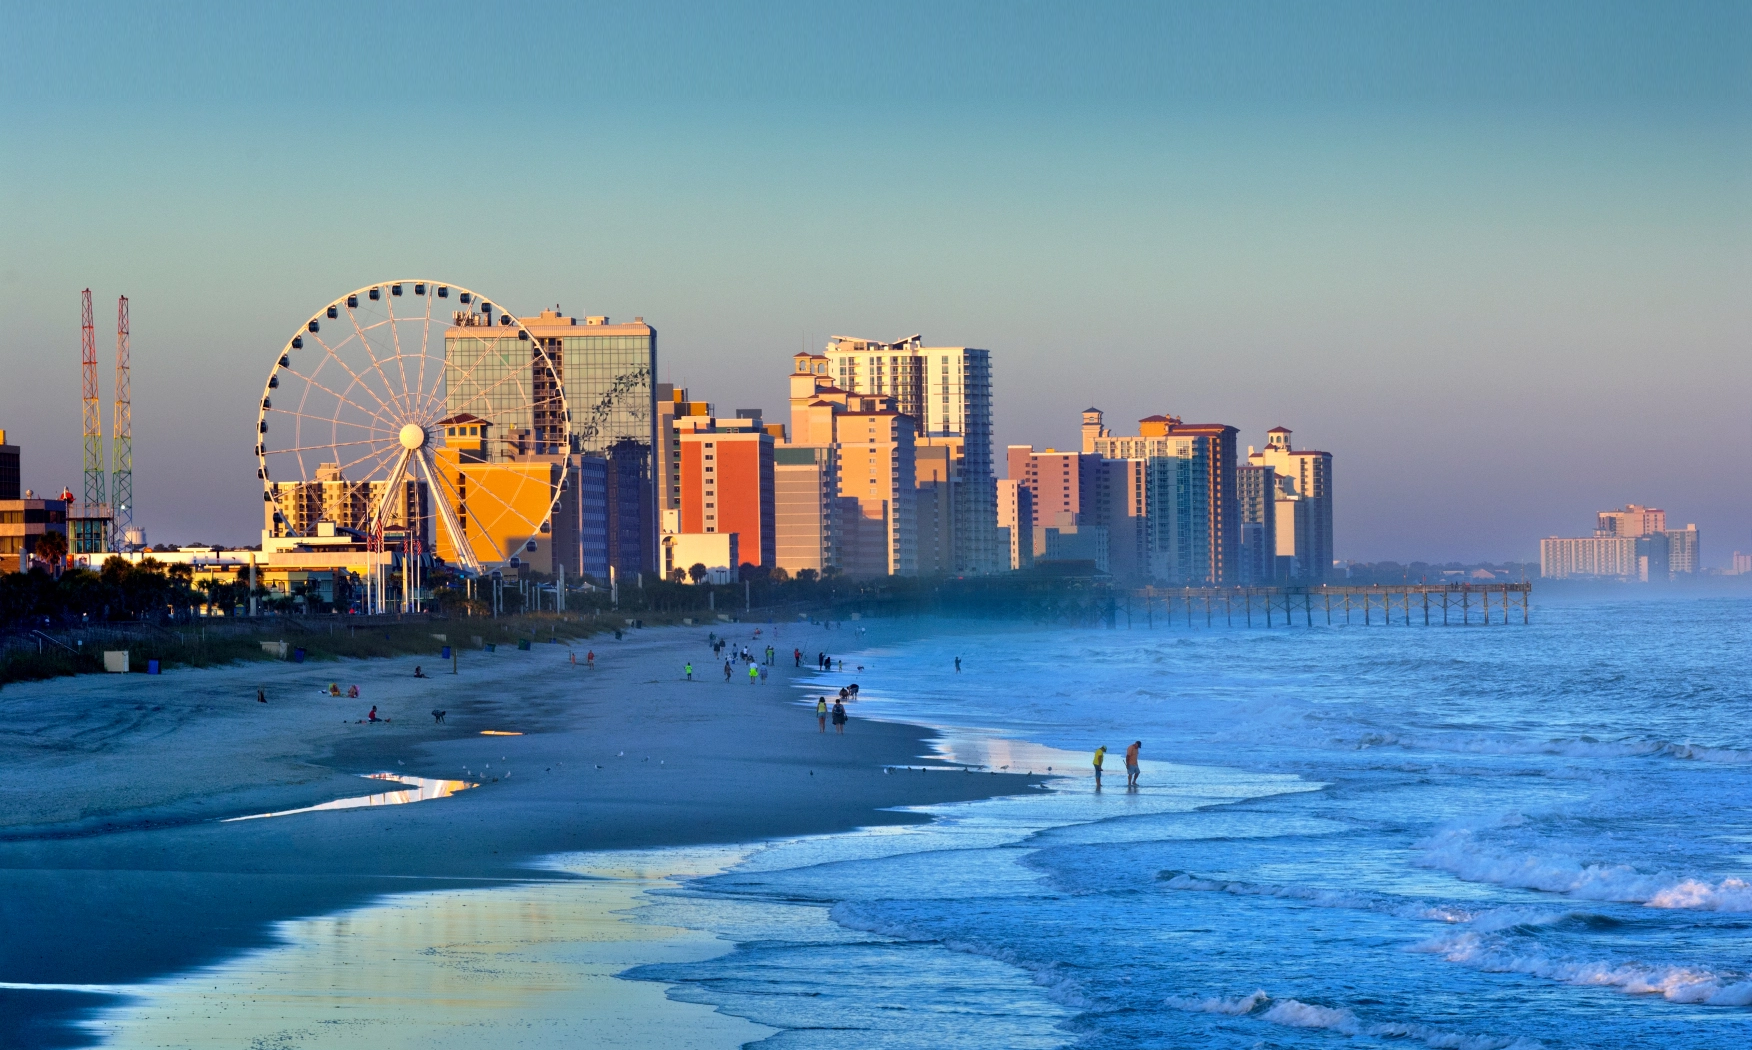 Educators get discounted rates at Myrtle Beach hotels and resorts.